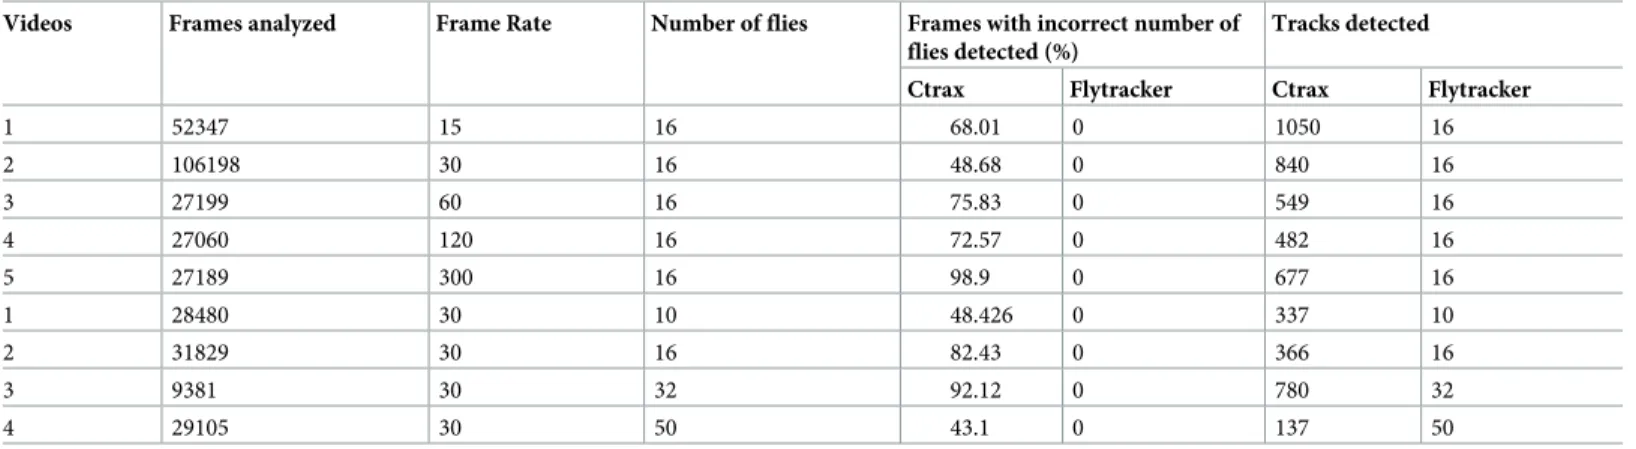 Table 1. Tracking results of Ctrax and Flytracker with different numbers of flies and videos at different frame rates.